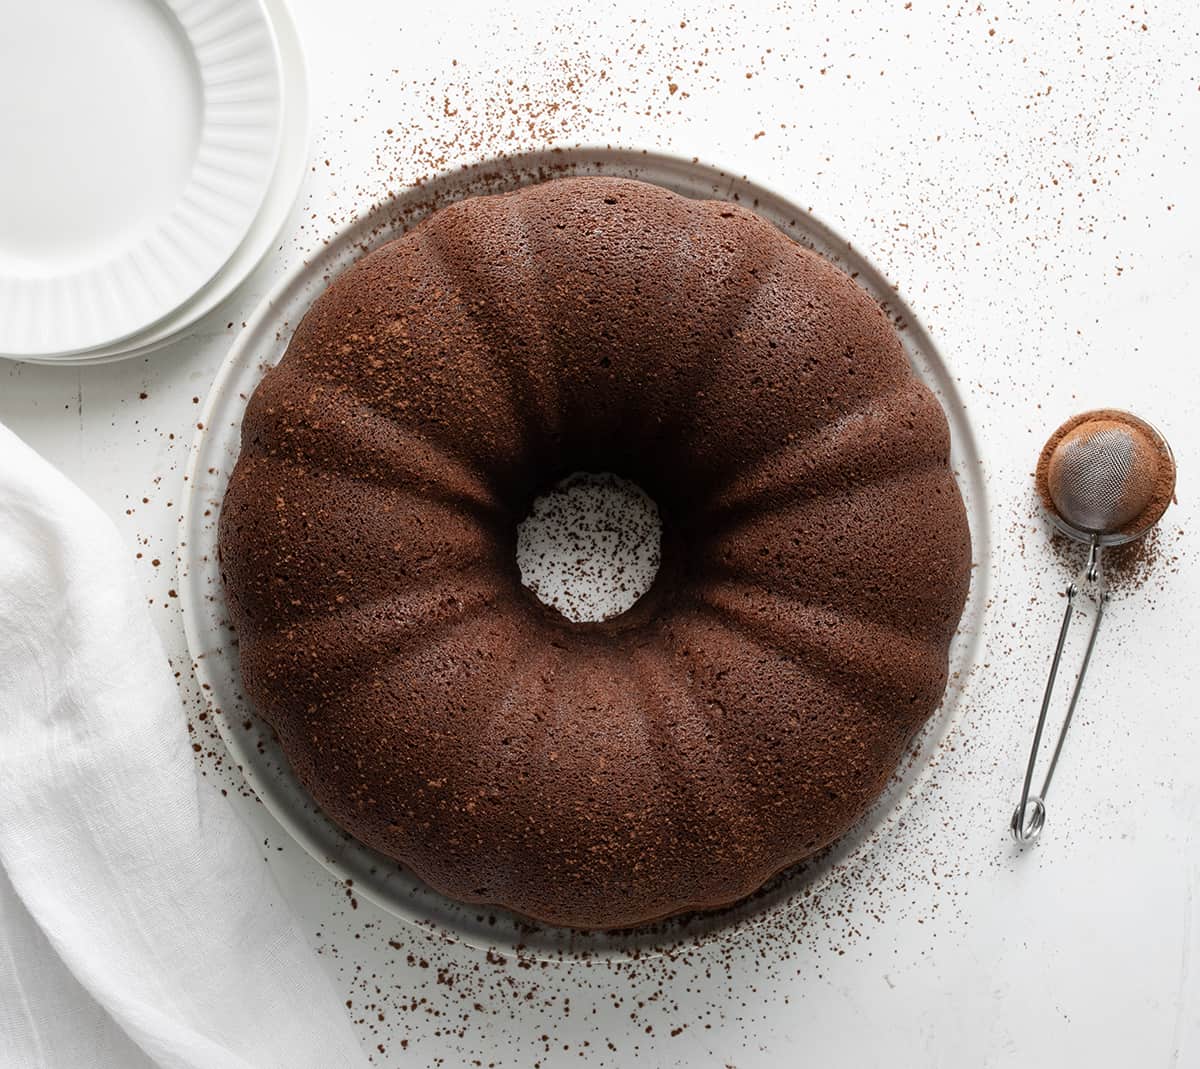 Whole Chocolate Pound Cake on a White Cake Plate on a Table.